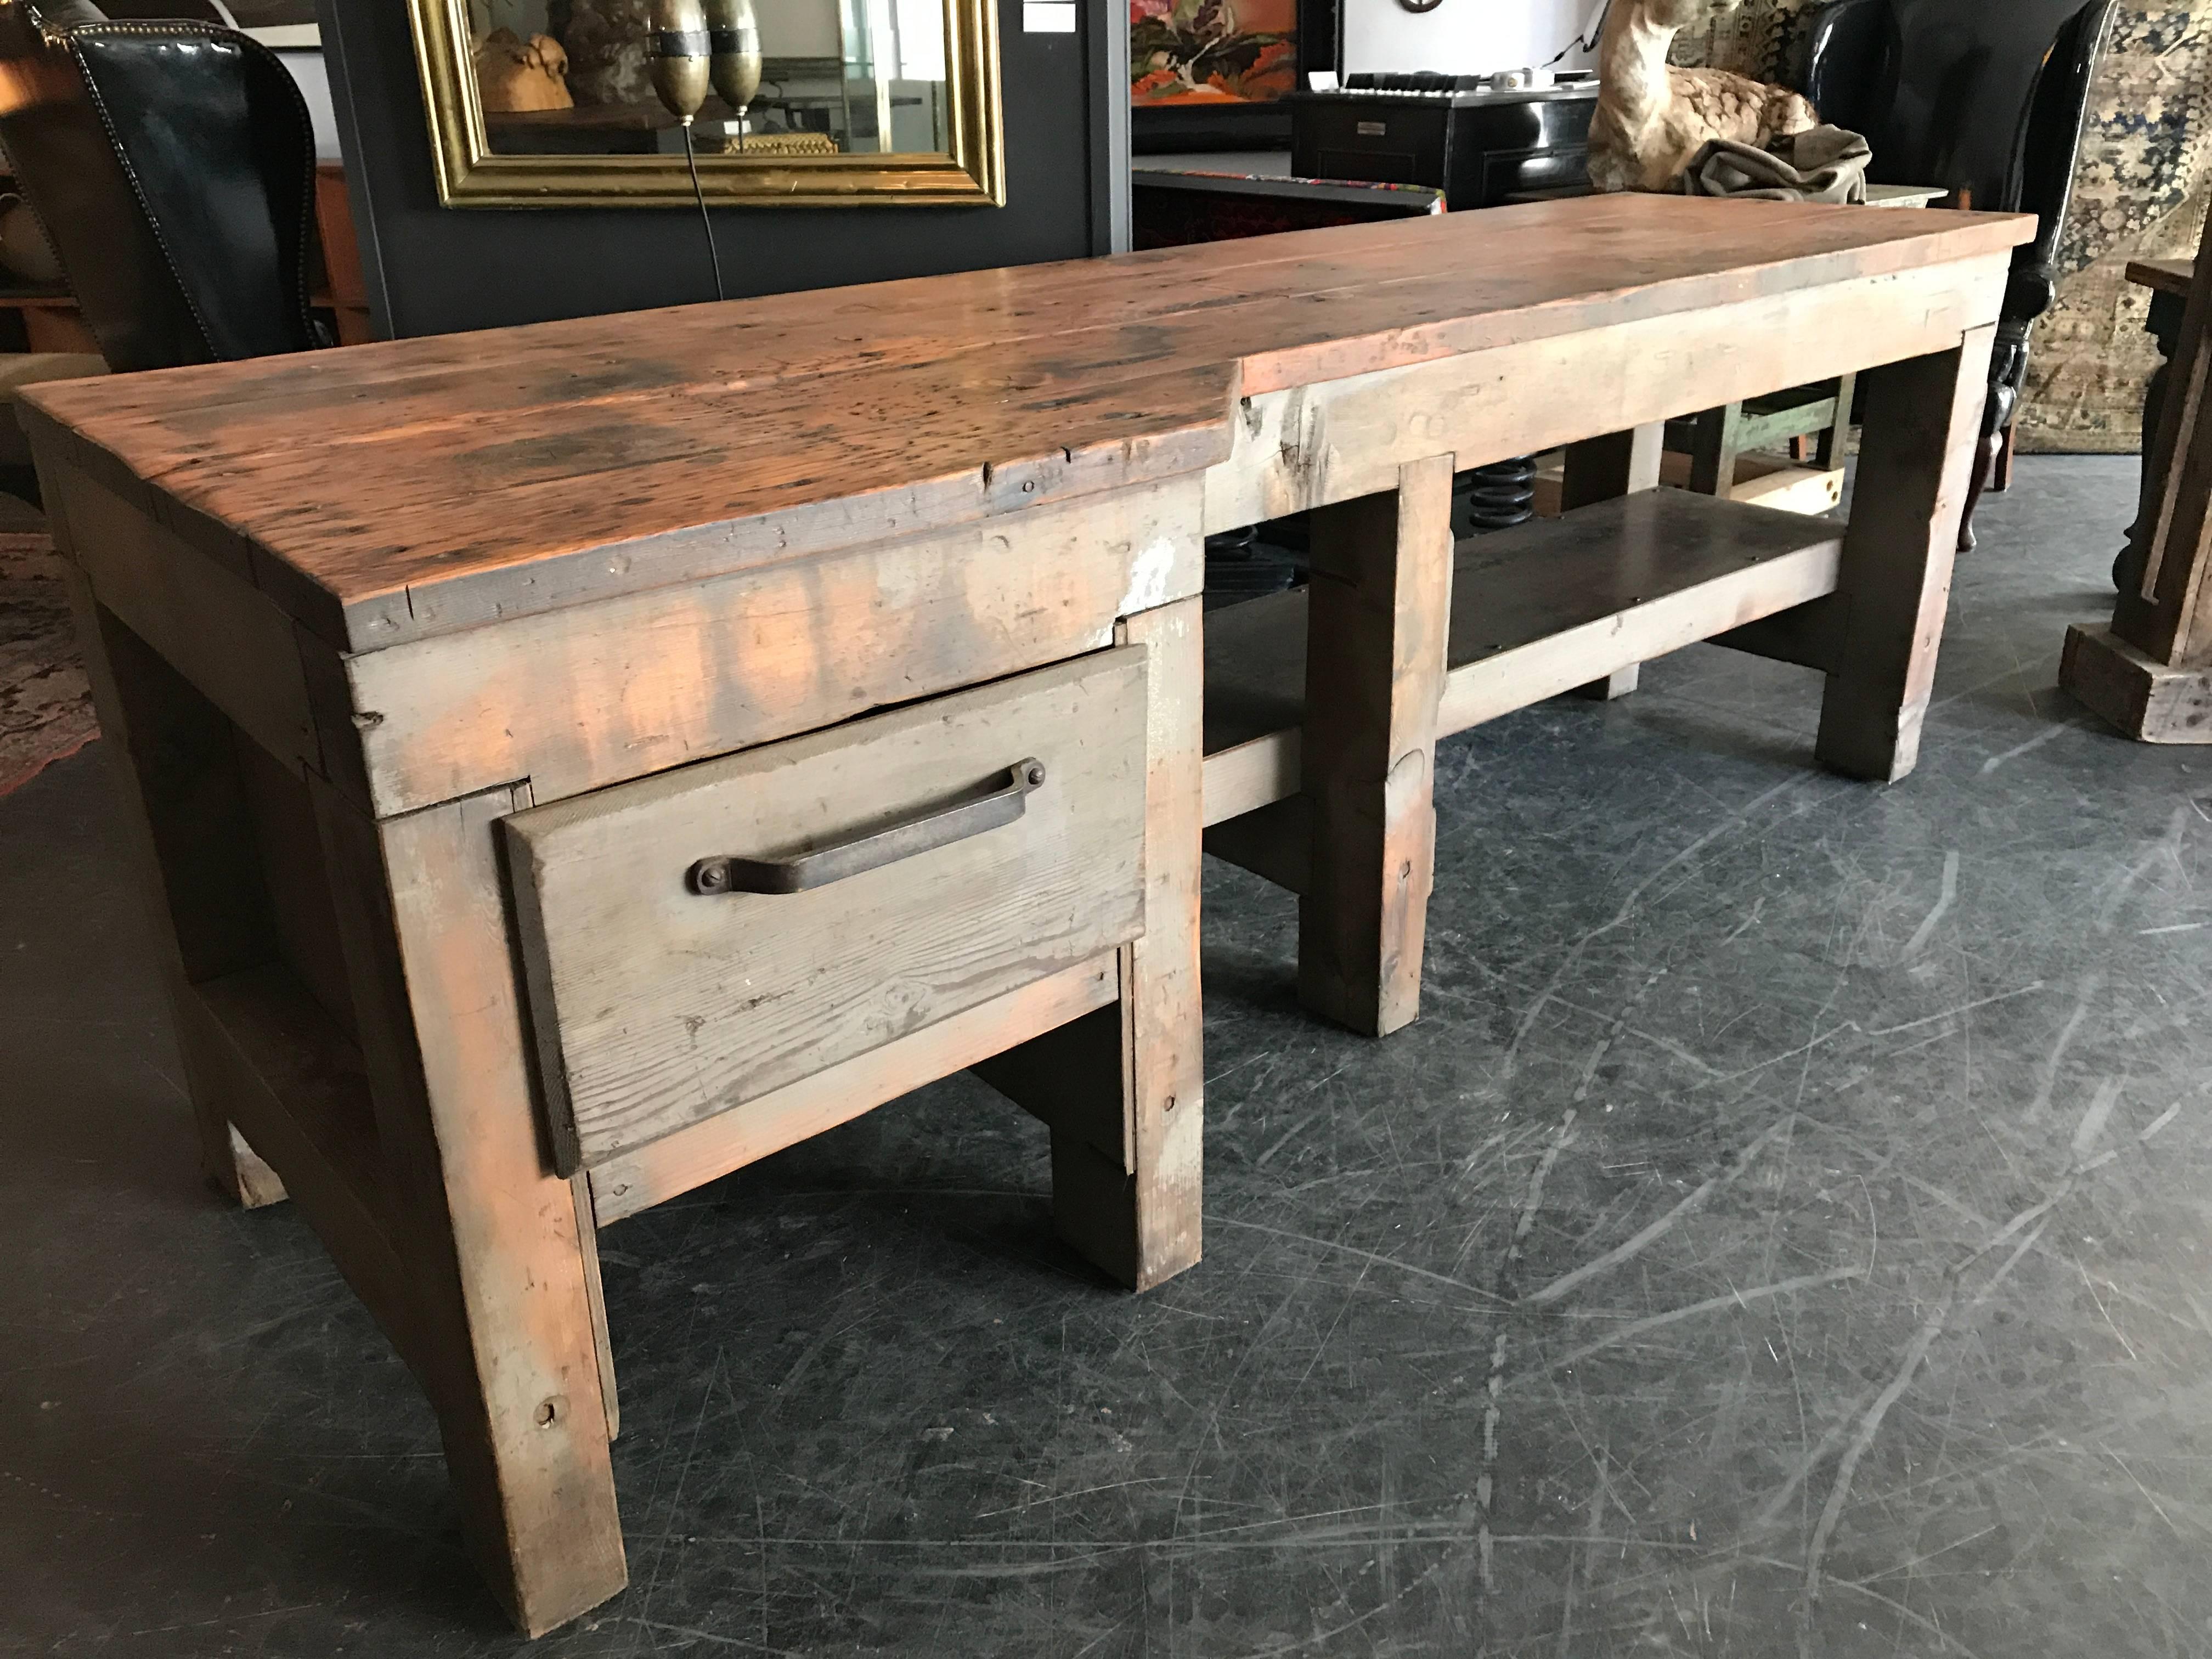 Beautifully restored Douglas Fir work station with remnants of pale grey paint. The lower shelf area has been finished with vintage steel plate and the single deep drawer has a beautifully forged original forged handle. This piece is super clean and